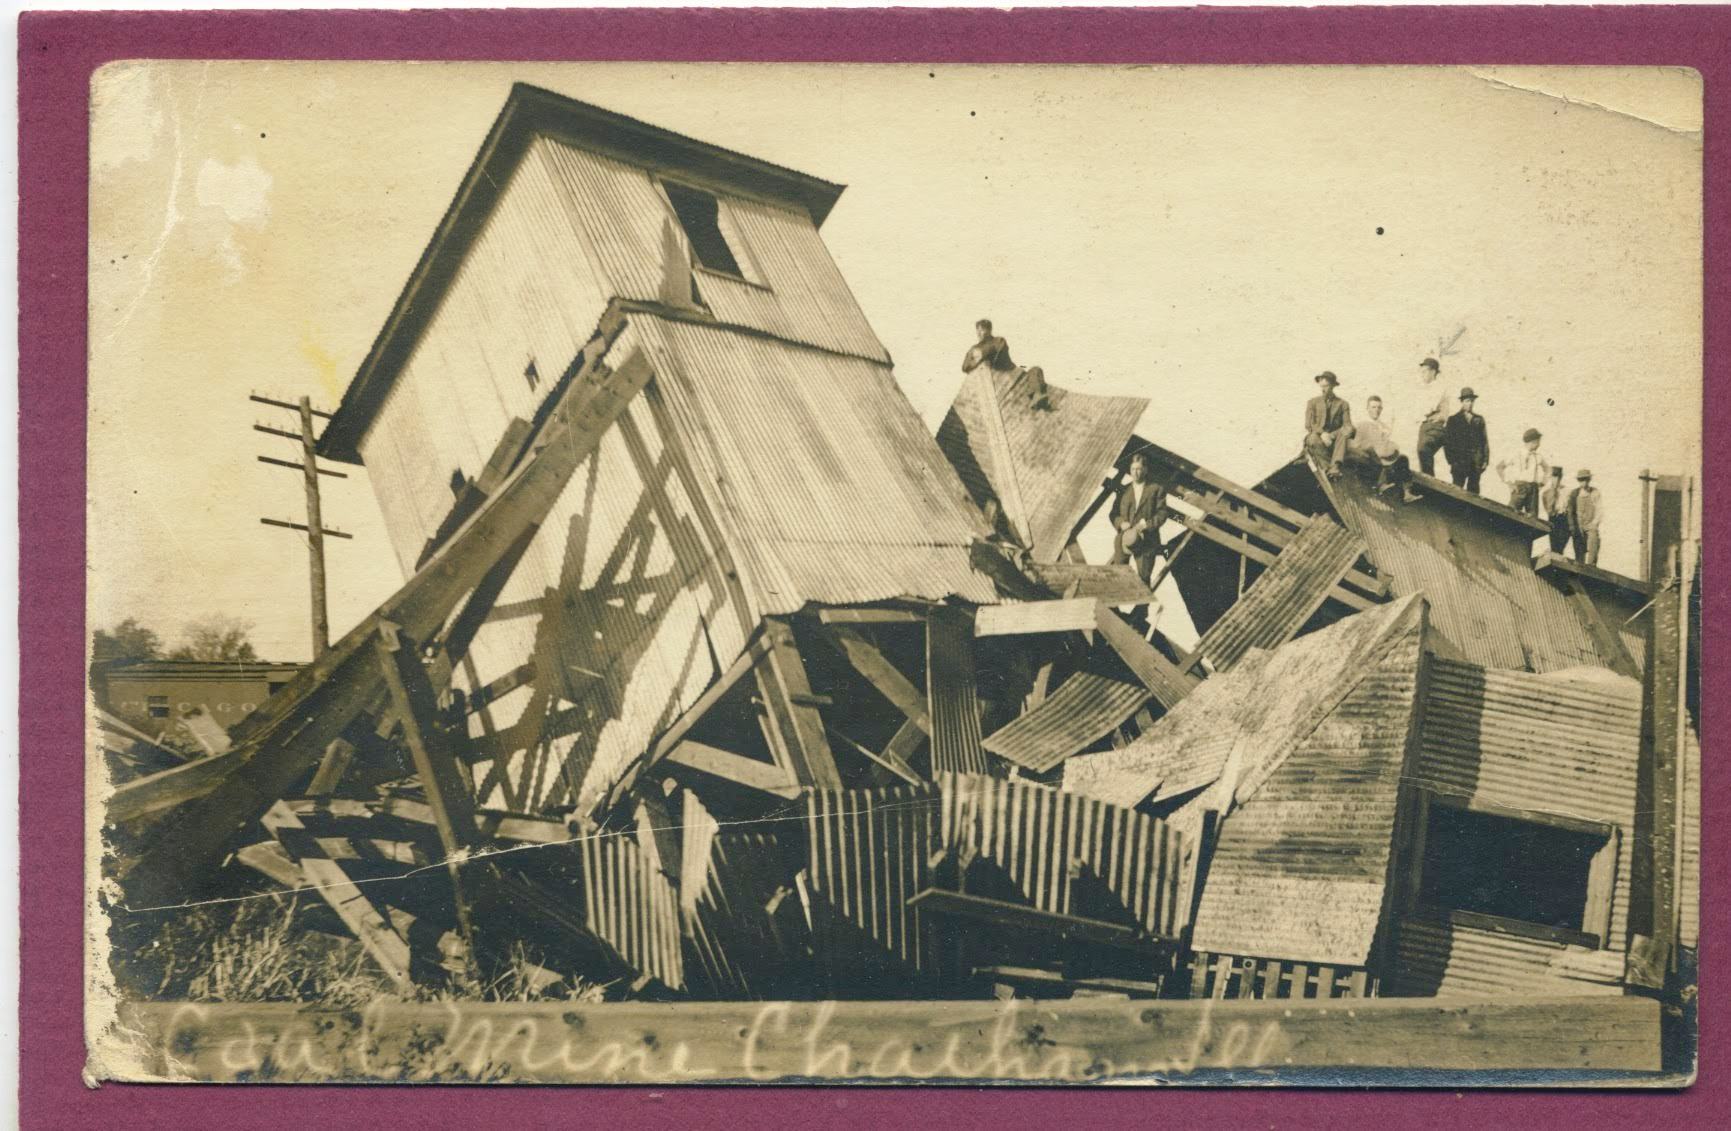 A group of men poses atop the collapsed tipple of Illinois Colleries Mine No. 8 near Chatham in 1910. (Collection of John "J.P." Taylor)